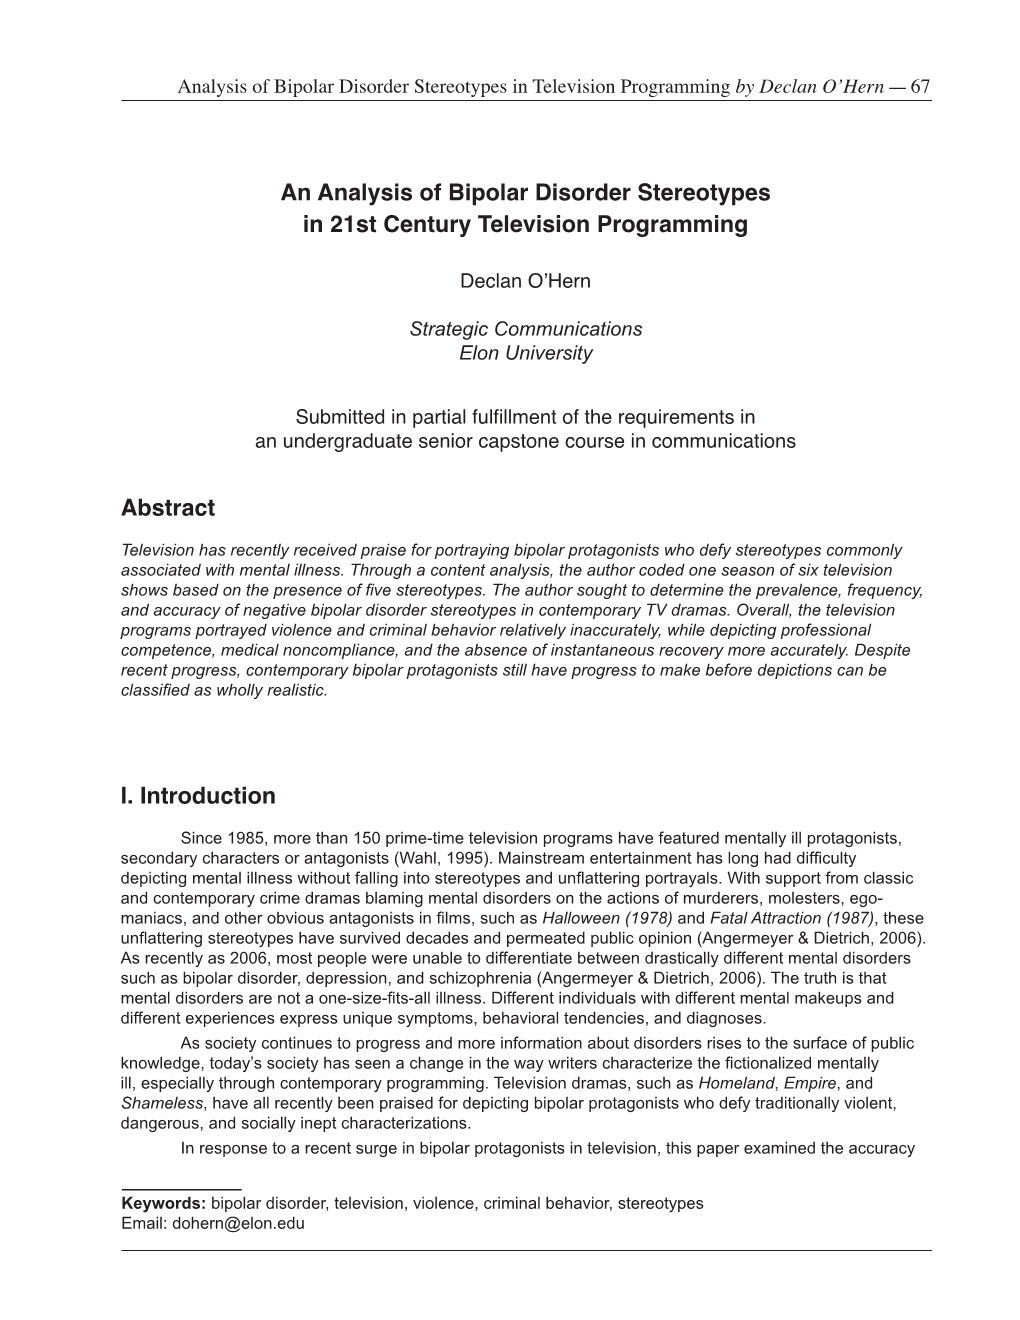 An Analysis of Bipolar Disorder Stereotypes in 21St Century Television Programming